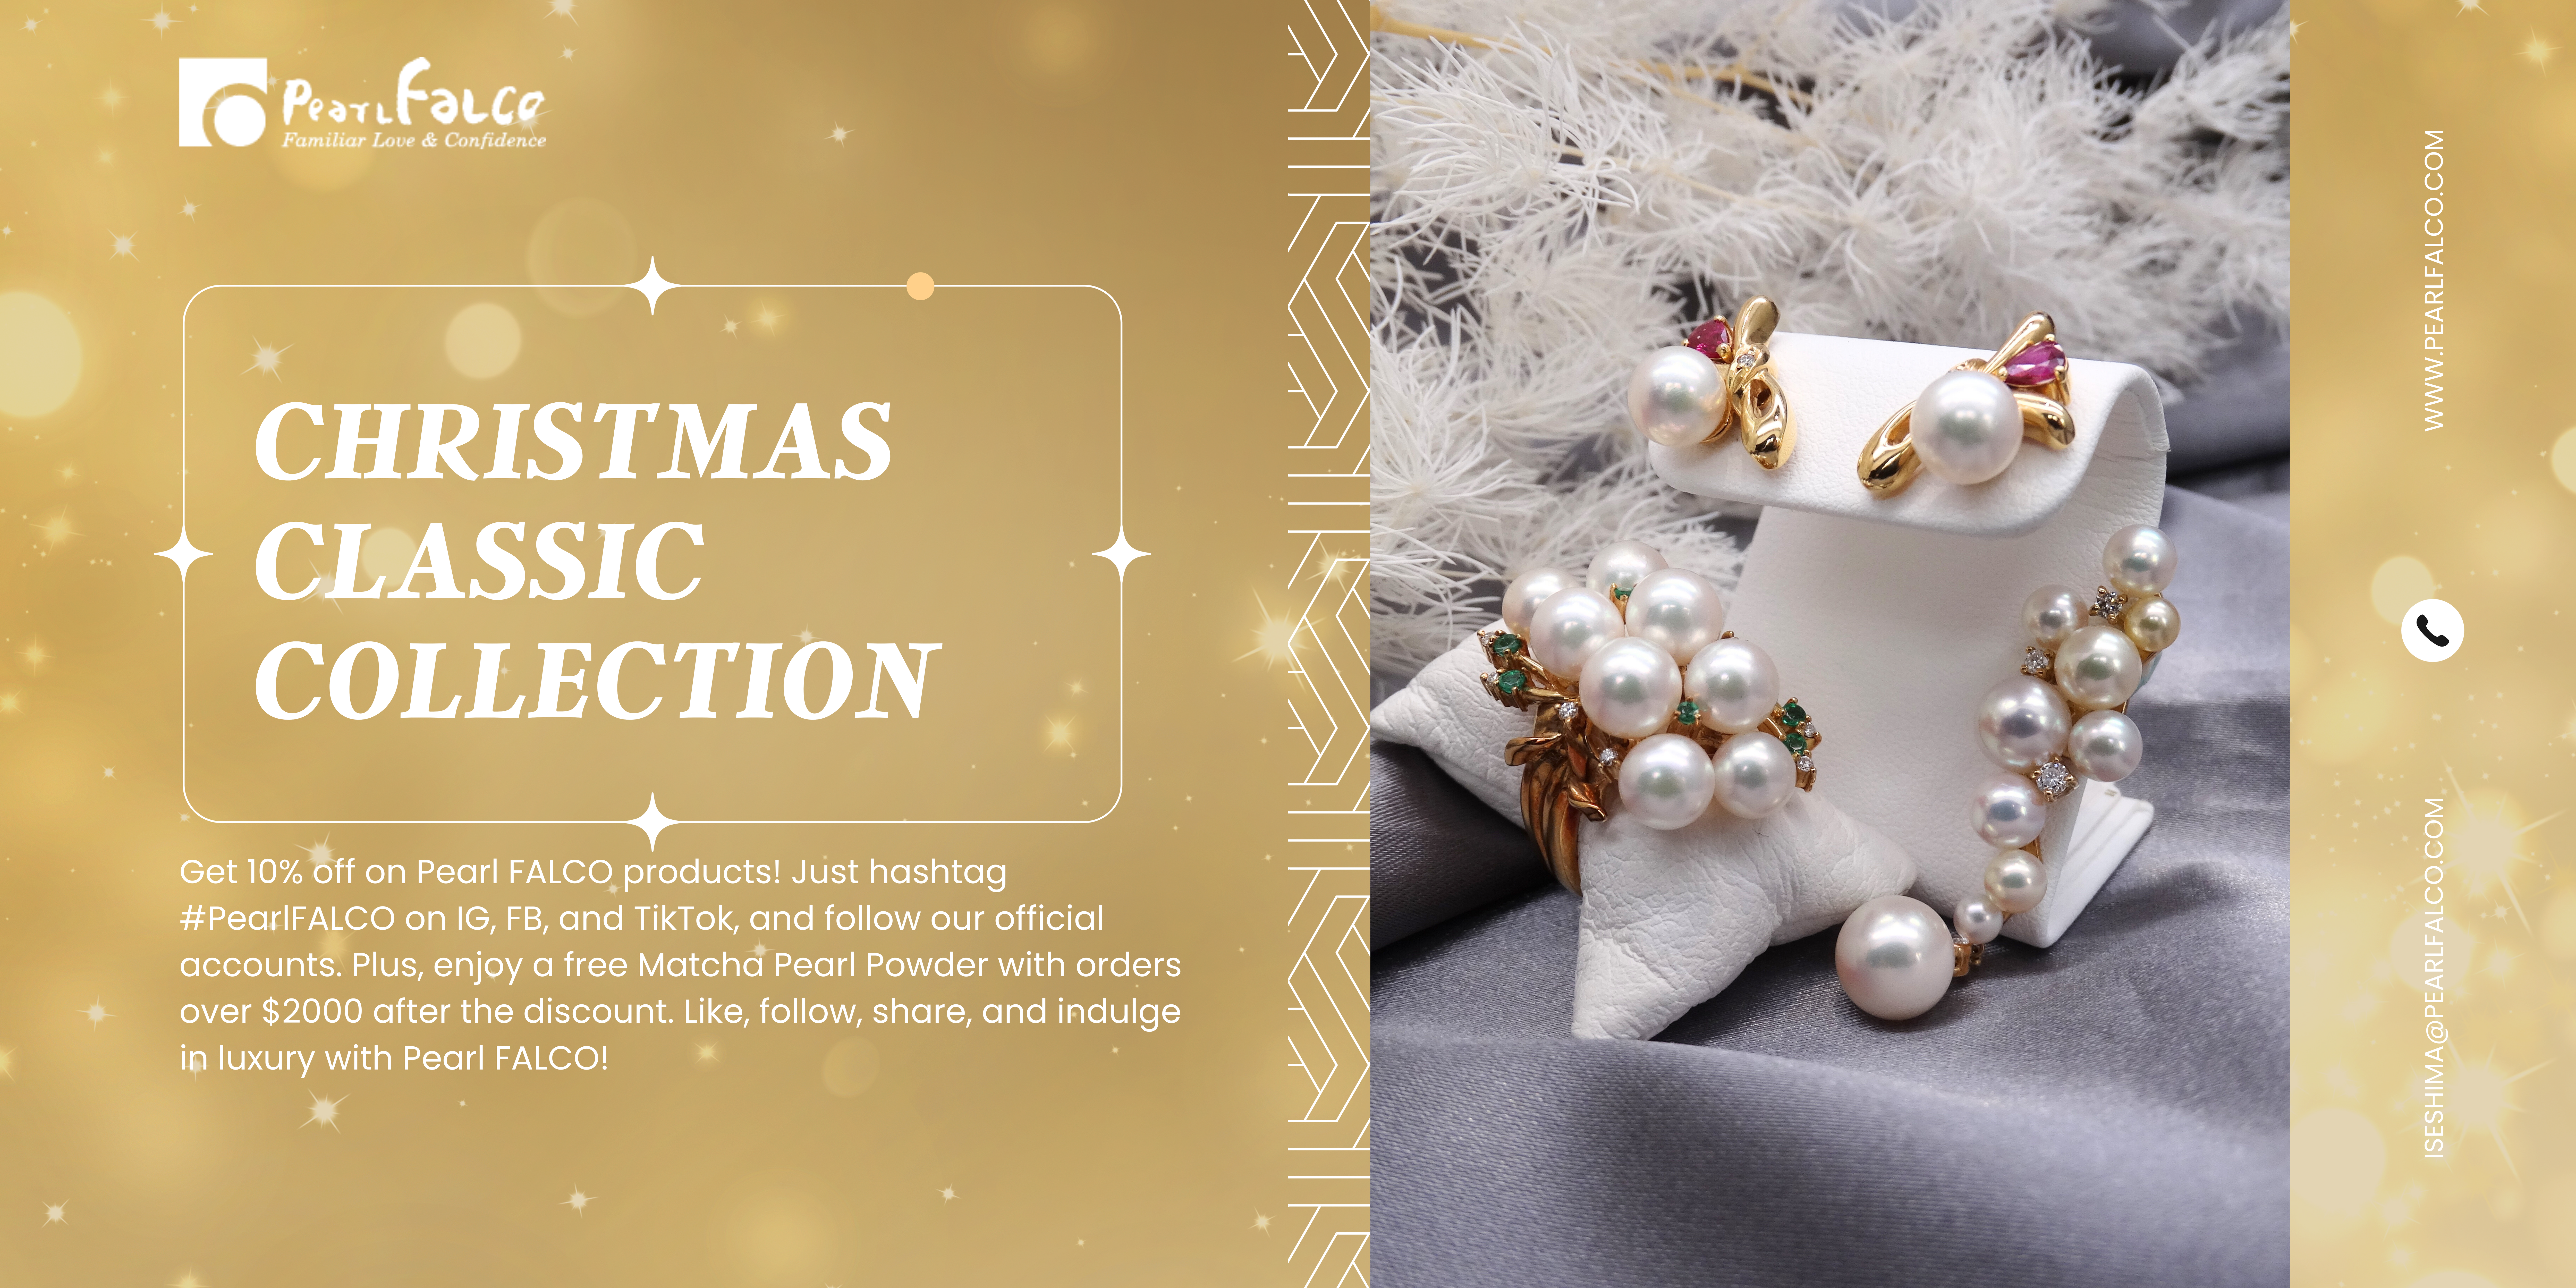 Celebrate Christmas in Style with Pearl Jewellery